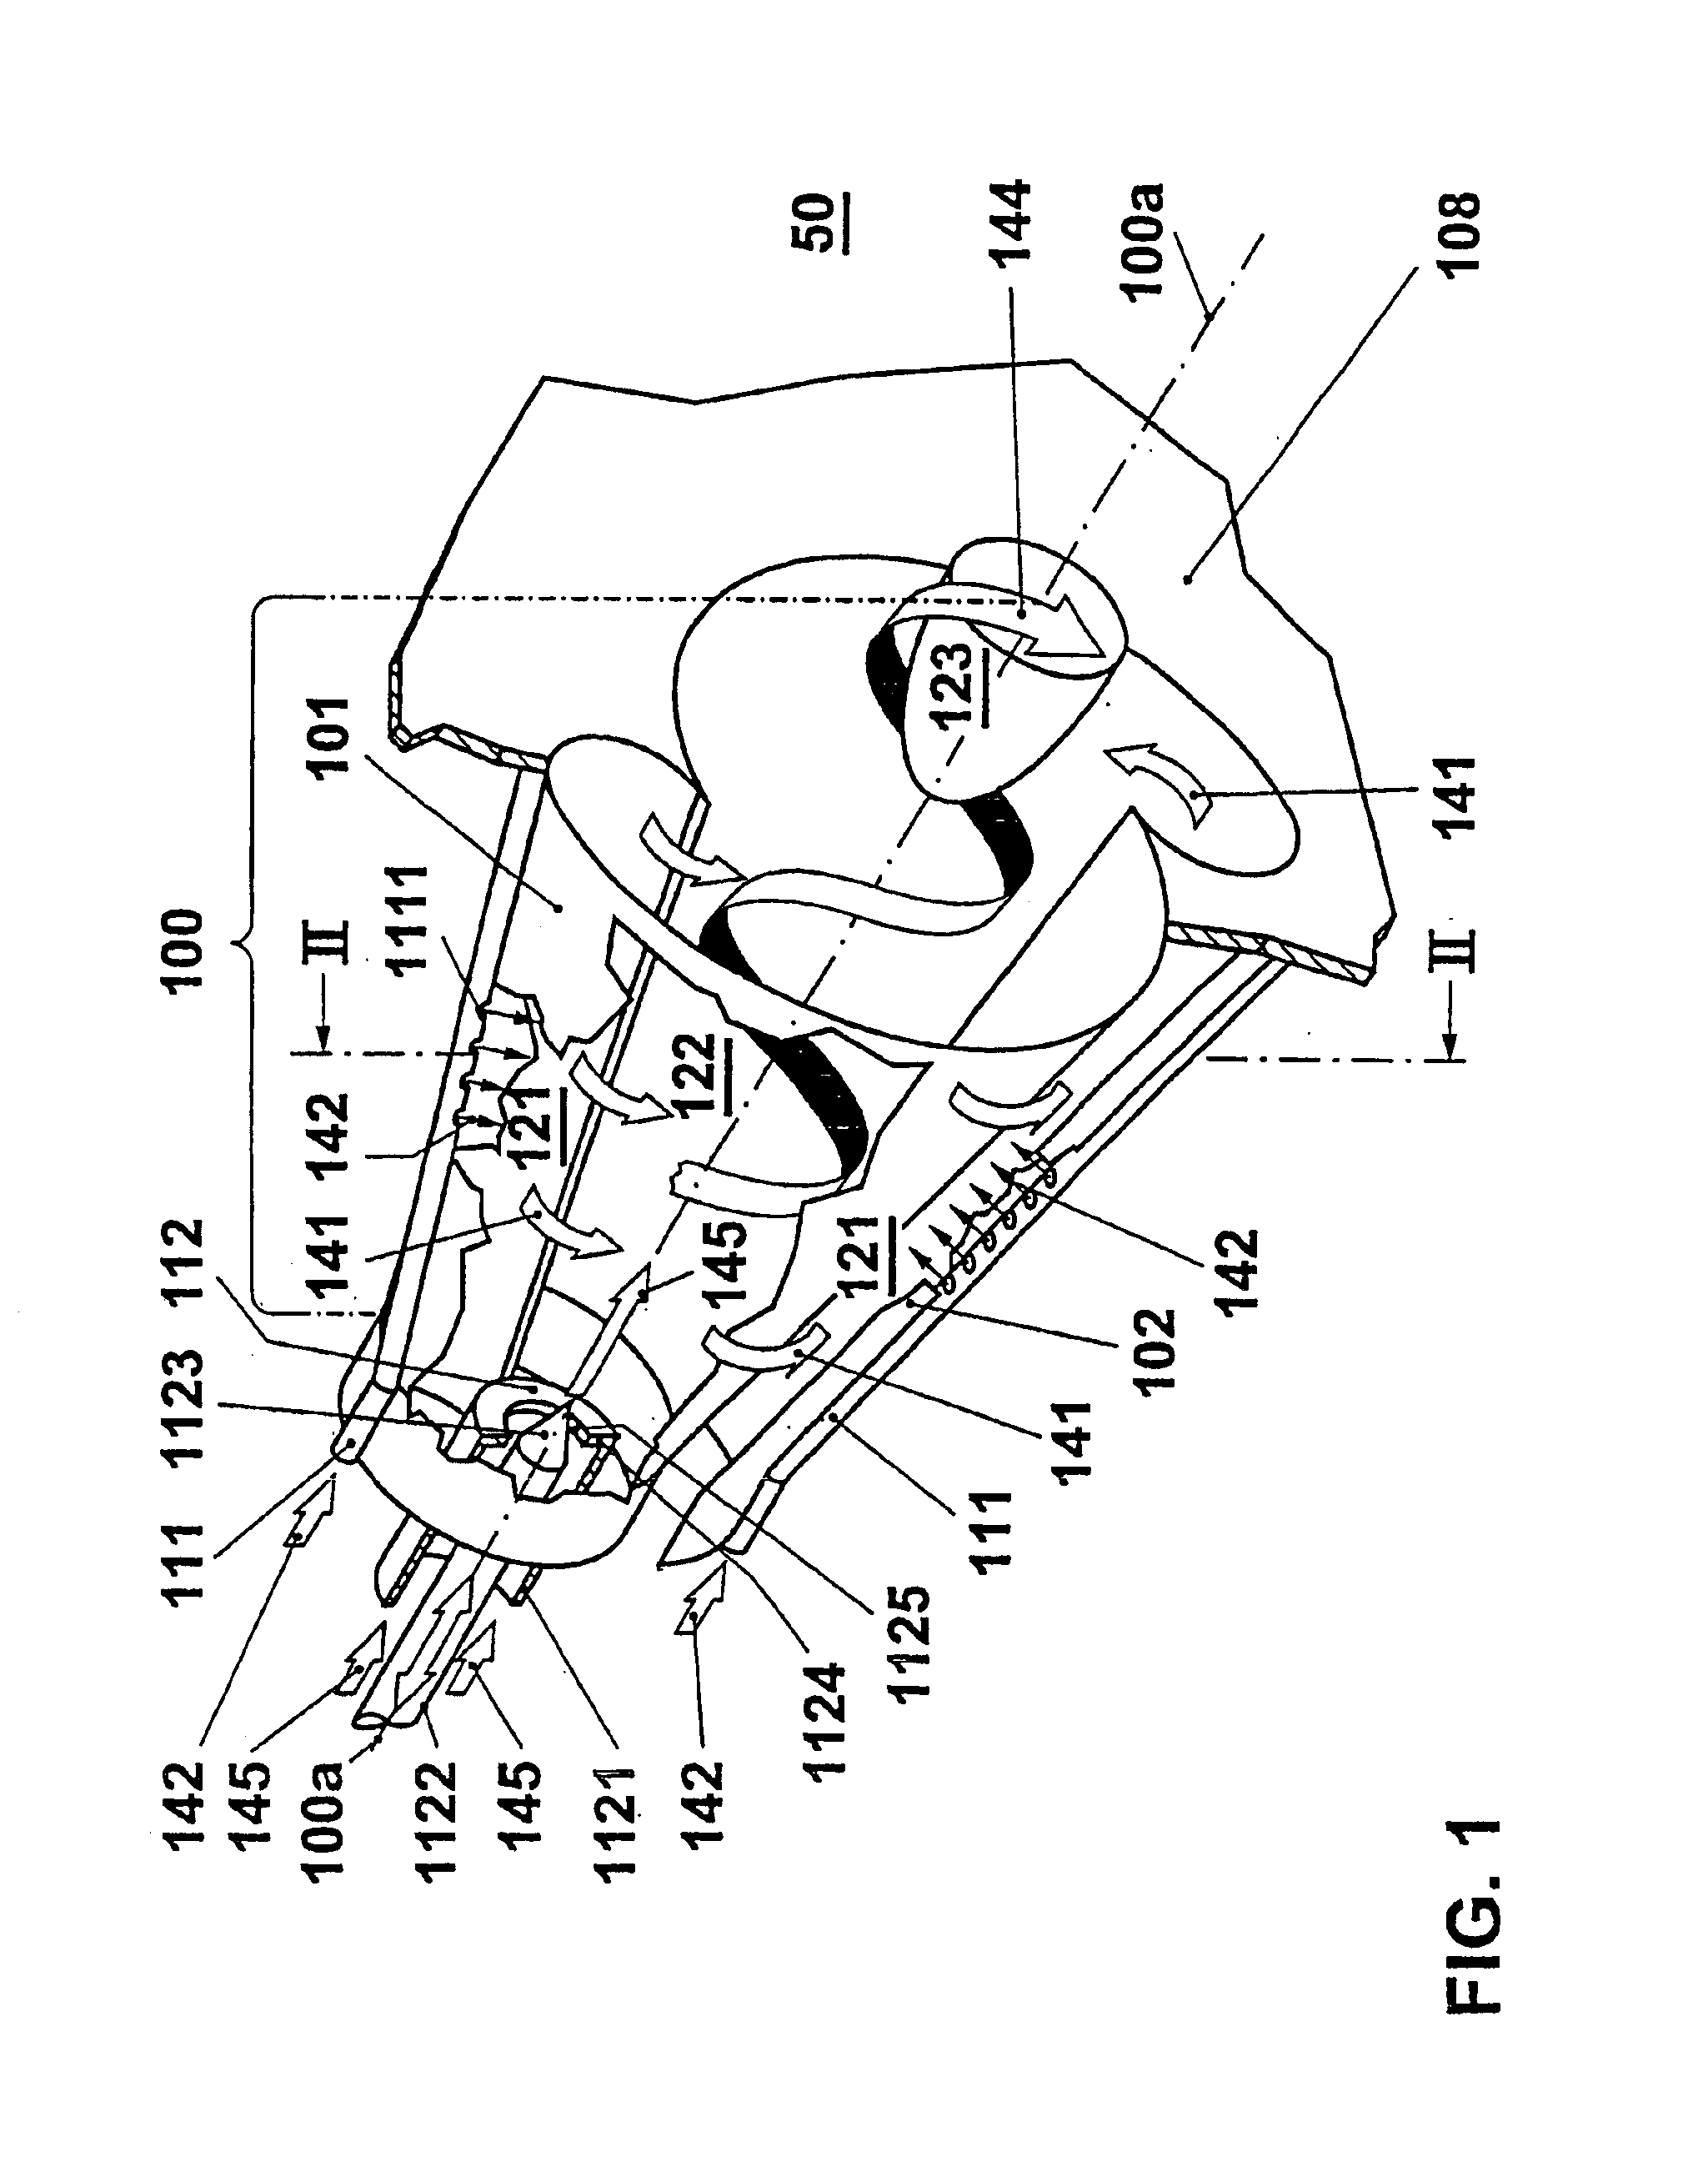 Process for operation of a burner with controlled axial central air mass flow